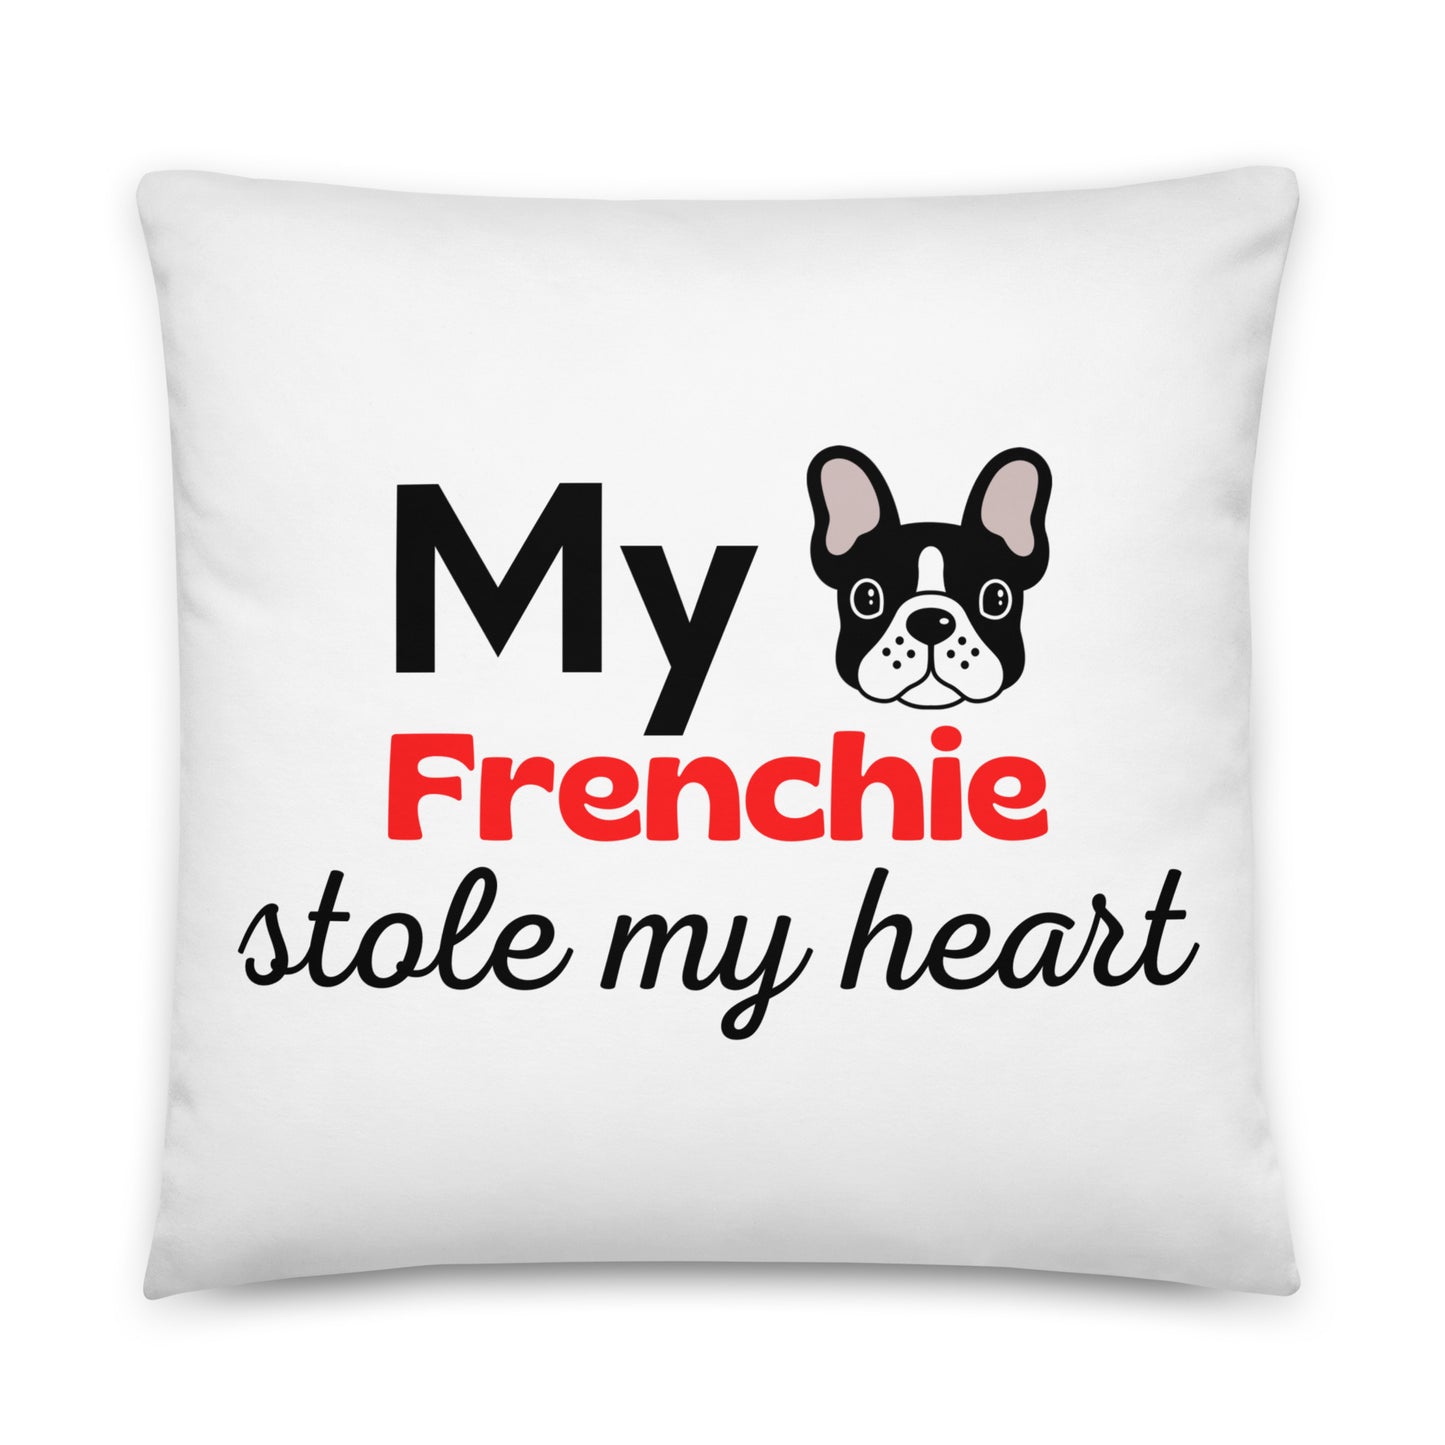 White Pillow 'My Frenchie stole my heart'